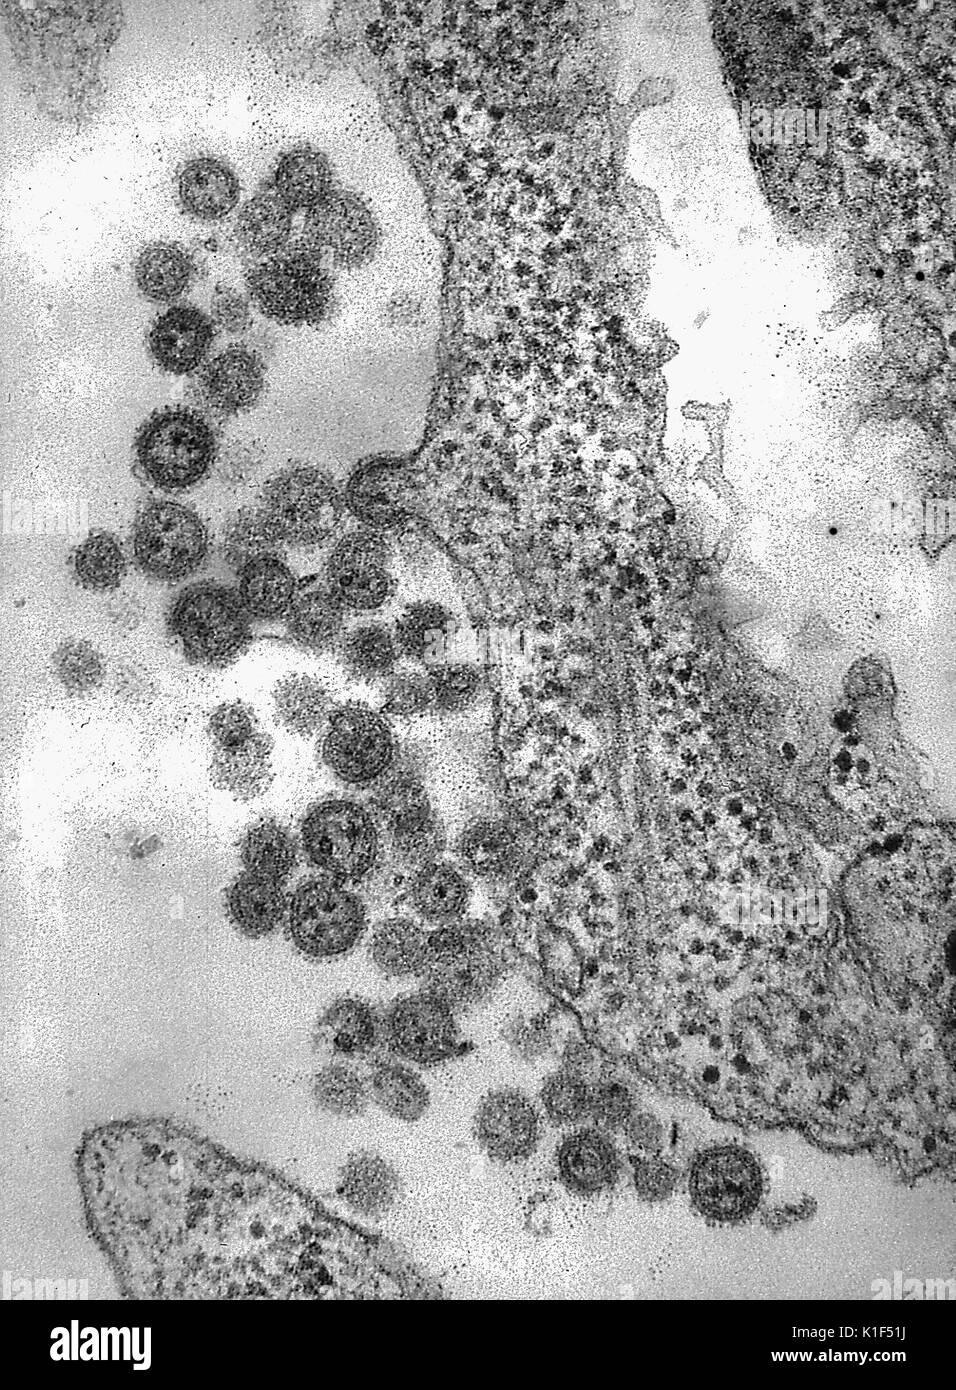 Electron photomicrograph of the Machupo Virus. Machupo Virus is a member of the Arenavirus family, isolated in the Beni province of Bolivia in 1963, Viral hemorrhagic Fever. Image courtesy CDC/Dr. Fred Murphy, Sylvia Whitfield, 1975. Stock Photo